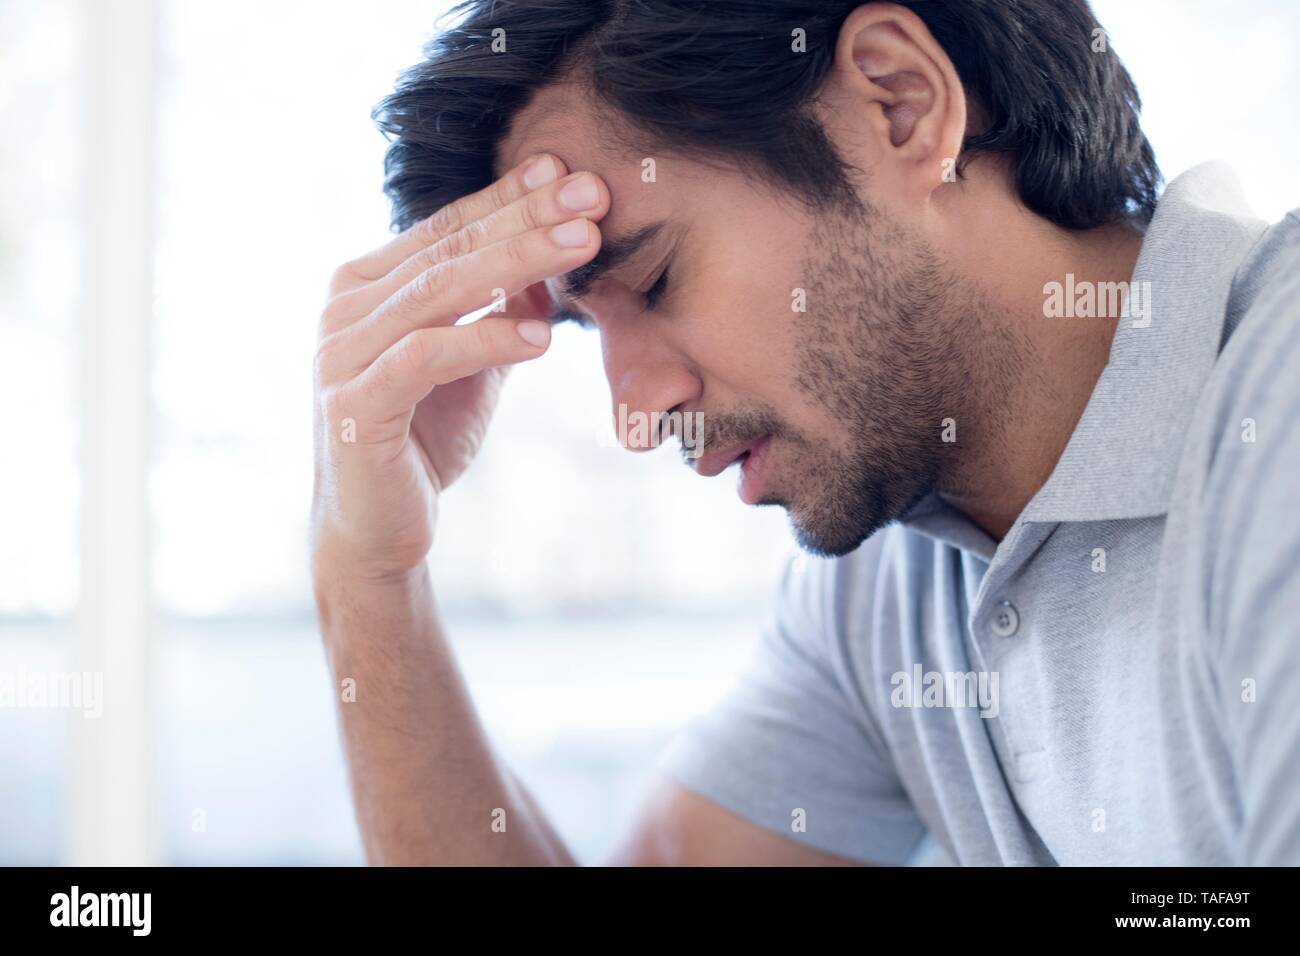 Man touching his forehead in pain Stock Photo